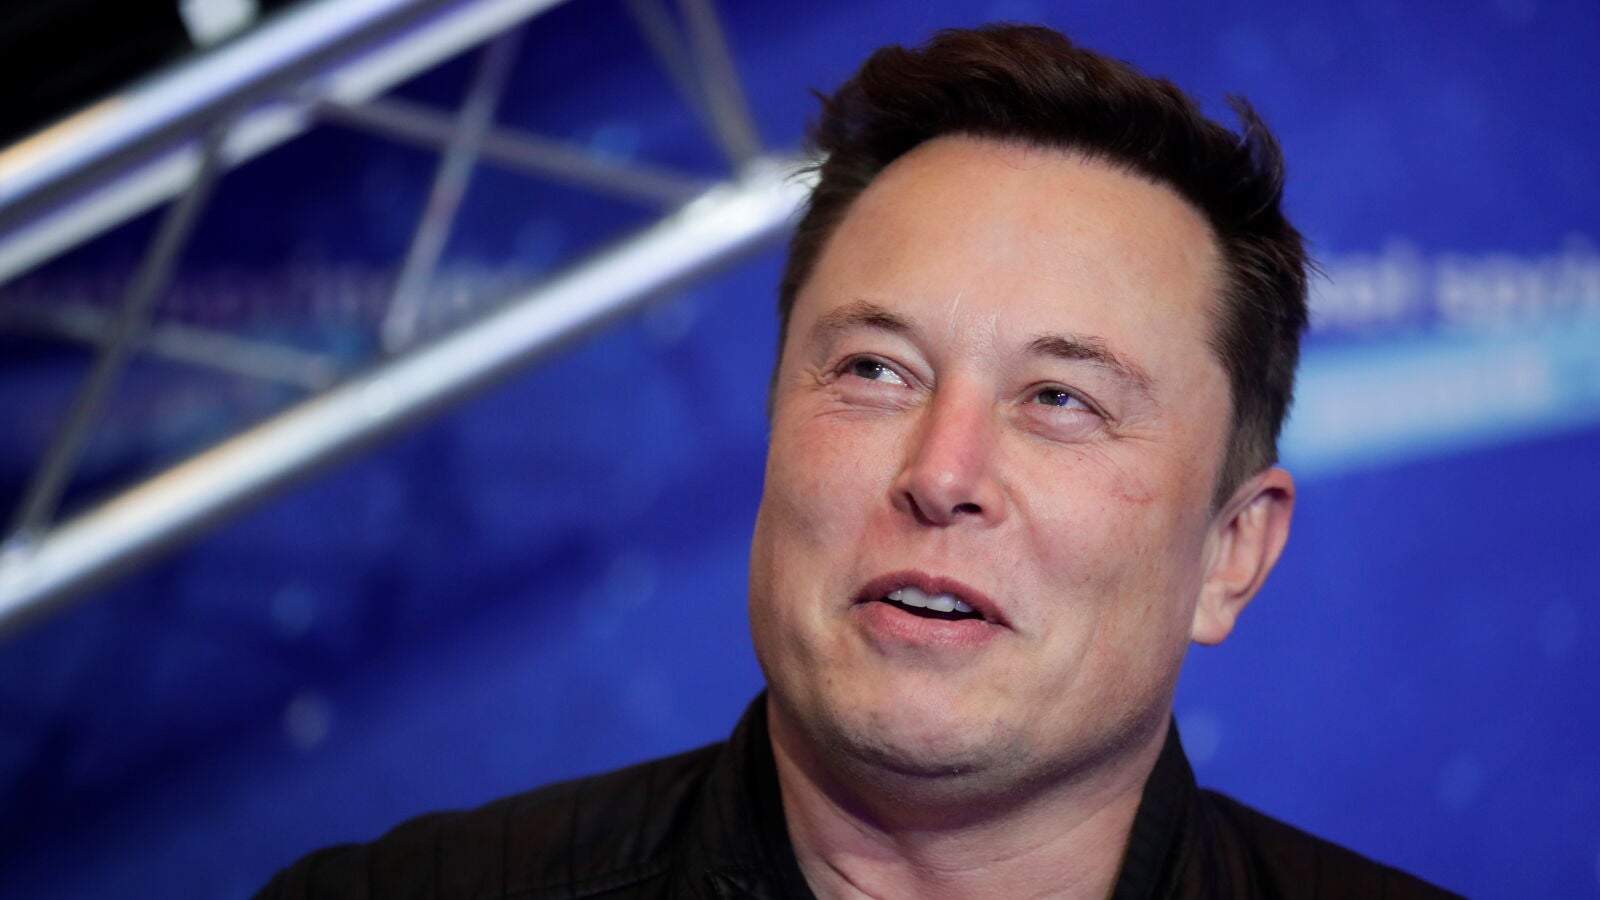 Elon Musk’s brain chip will soon be tested on humans